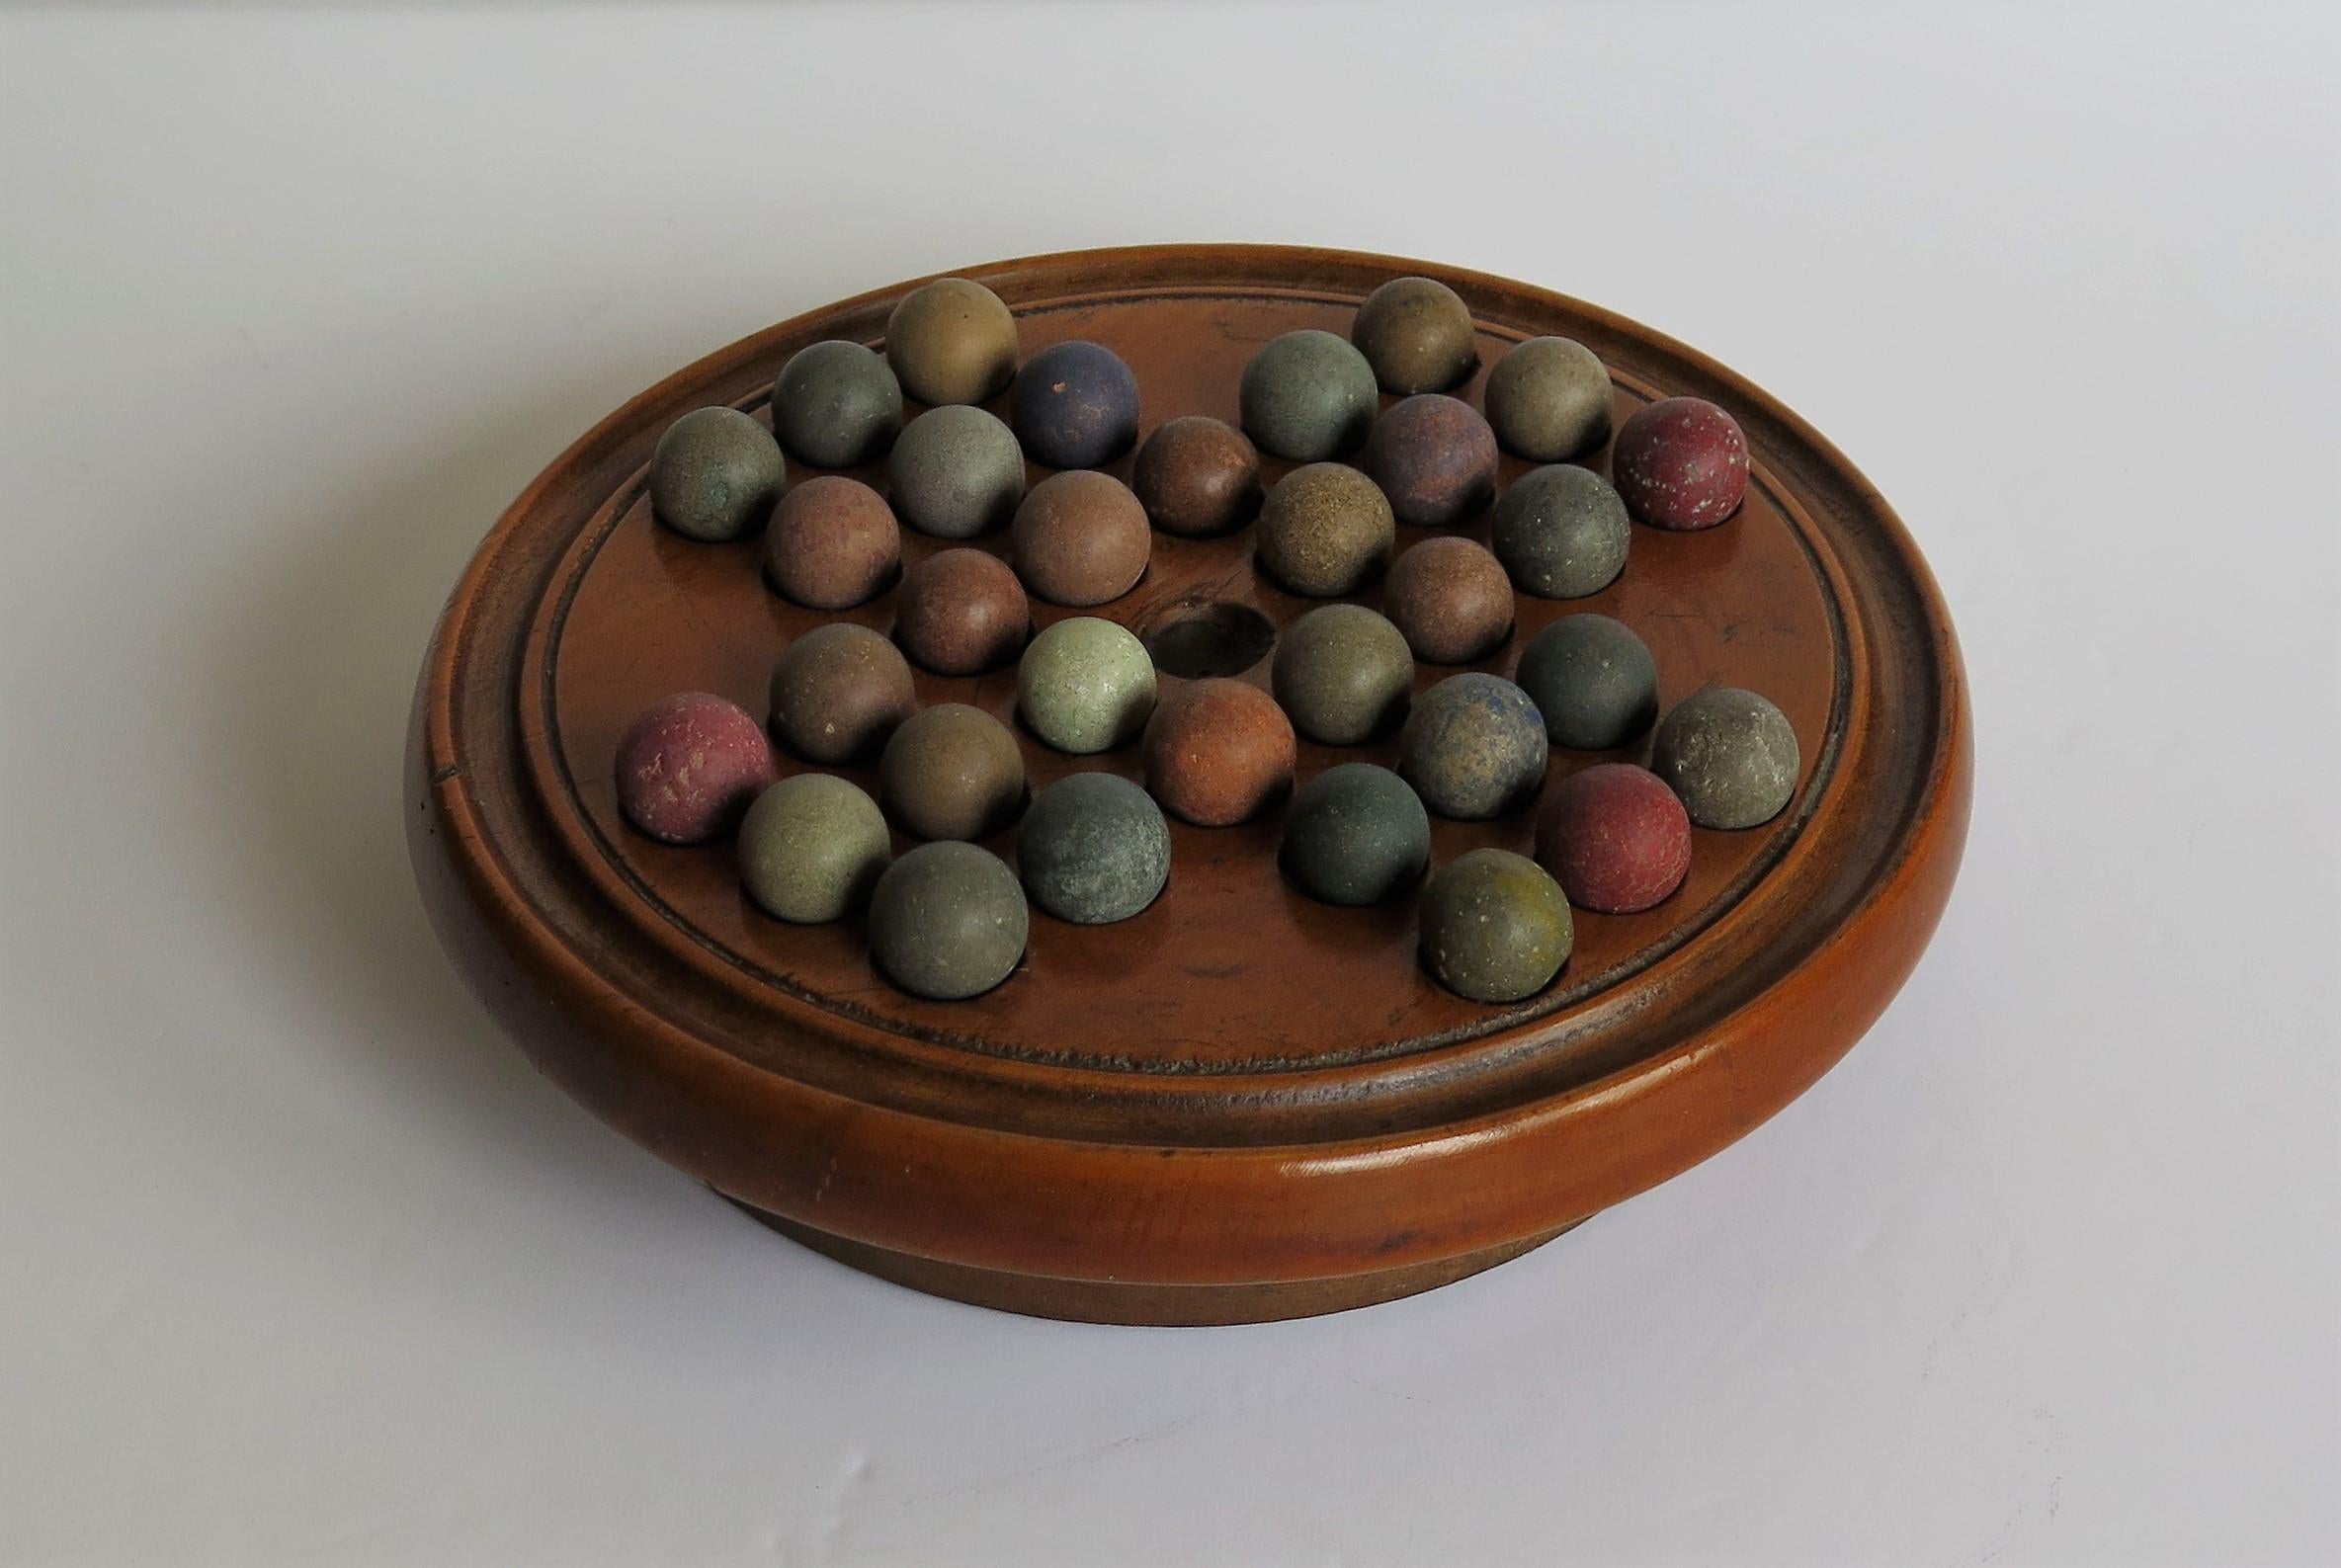 English 19th Century Travelling Marble Solitaire Game with 32 Handmade Clay Marbles